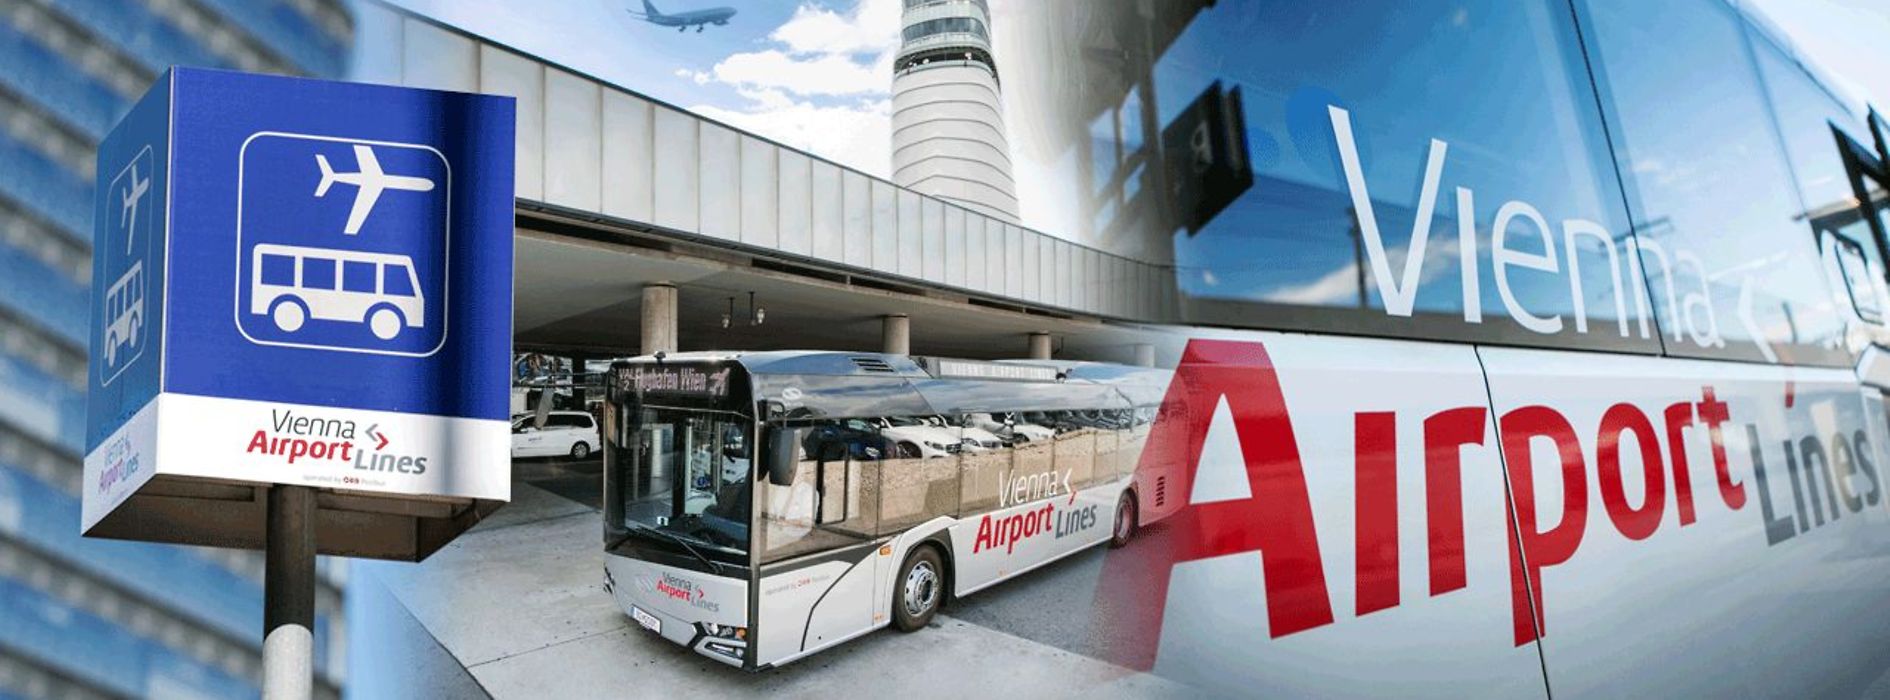 Vienna Airportline Bus at parking space, Airporttower in the back